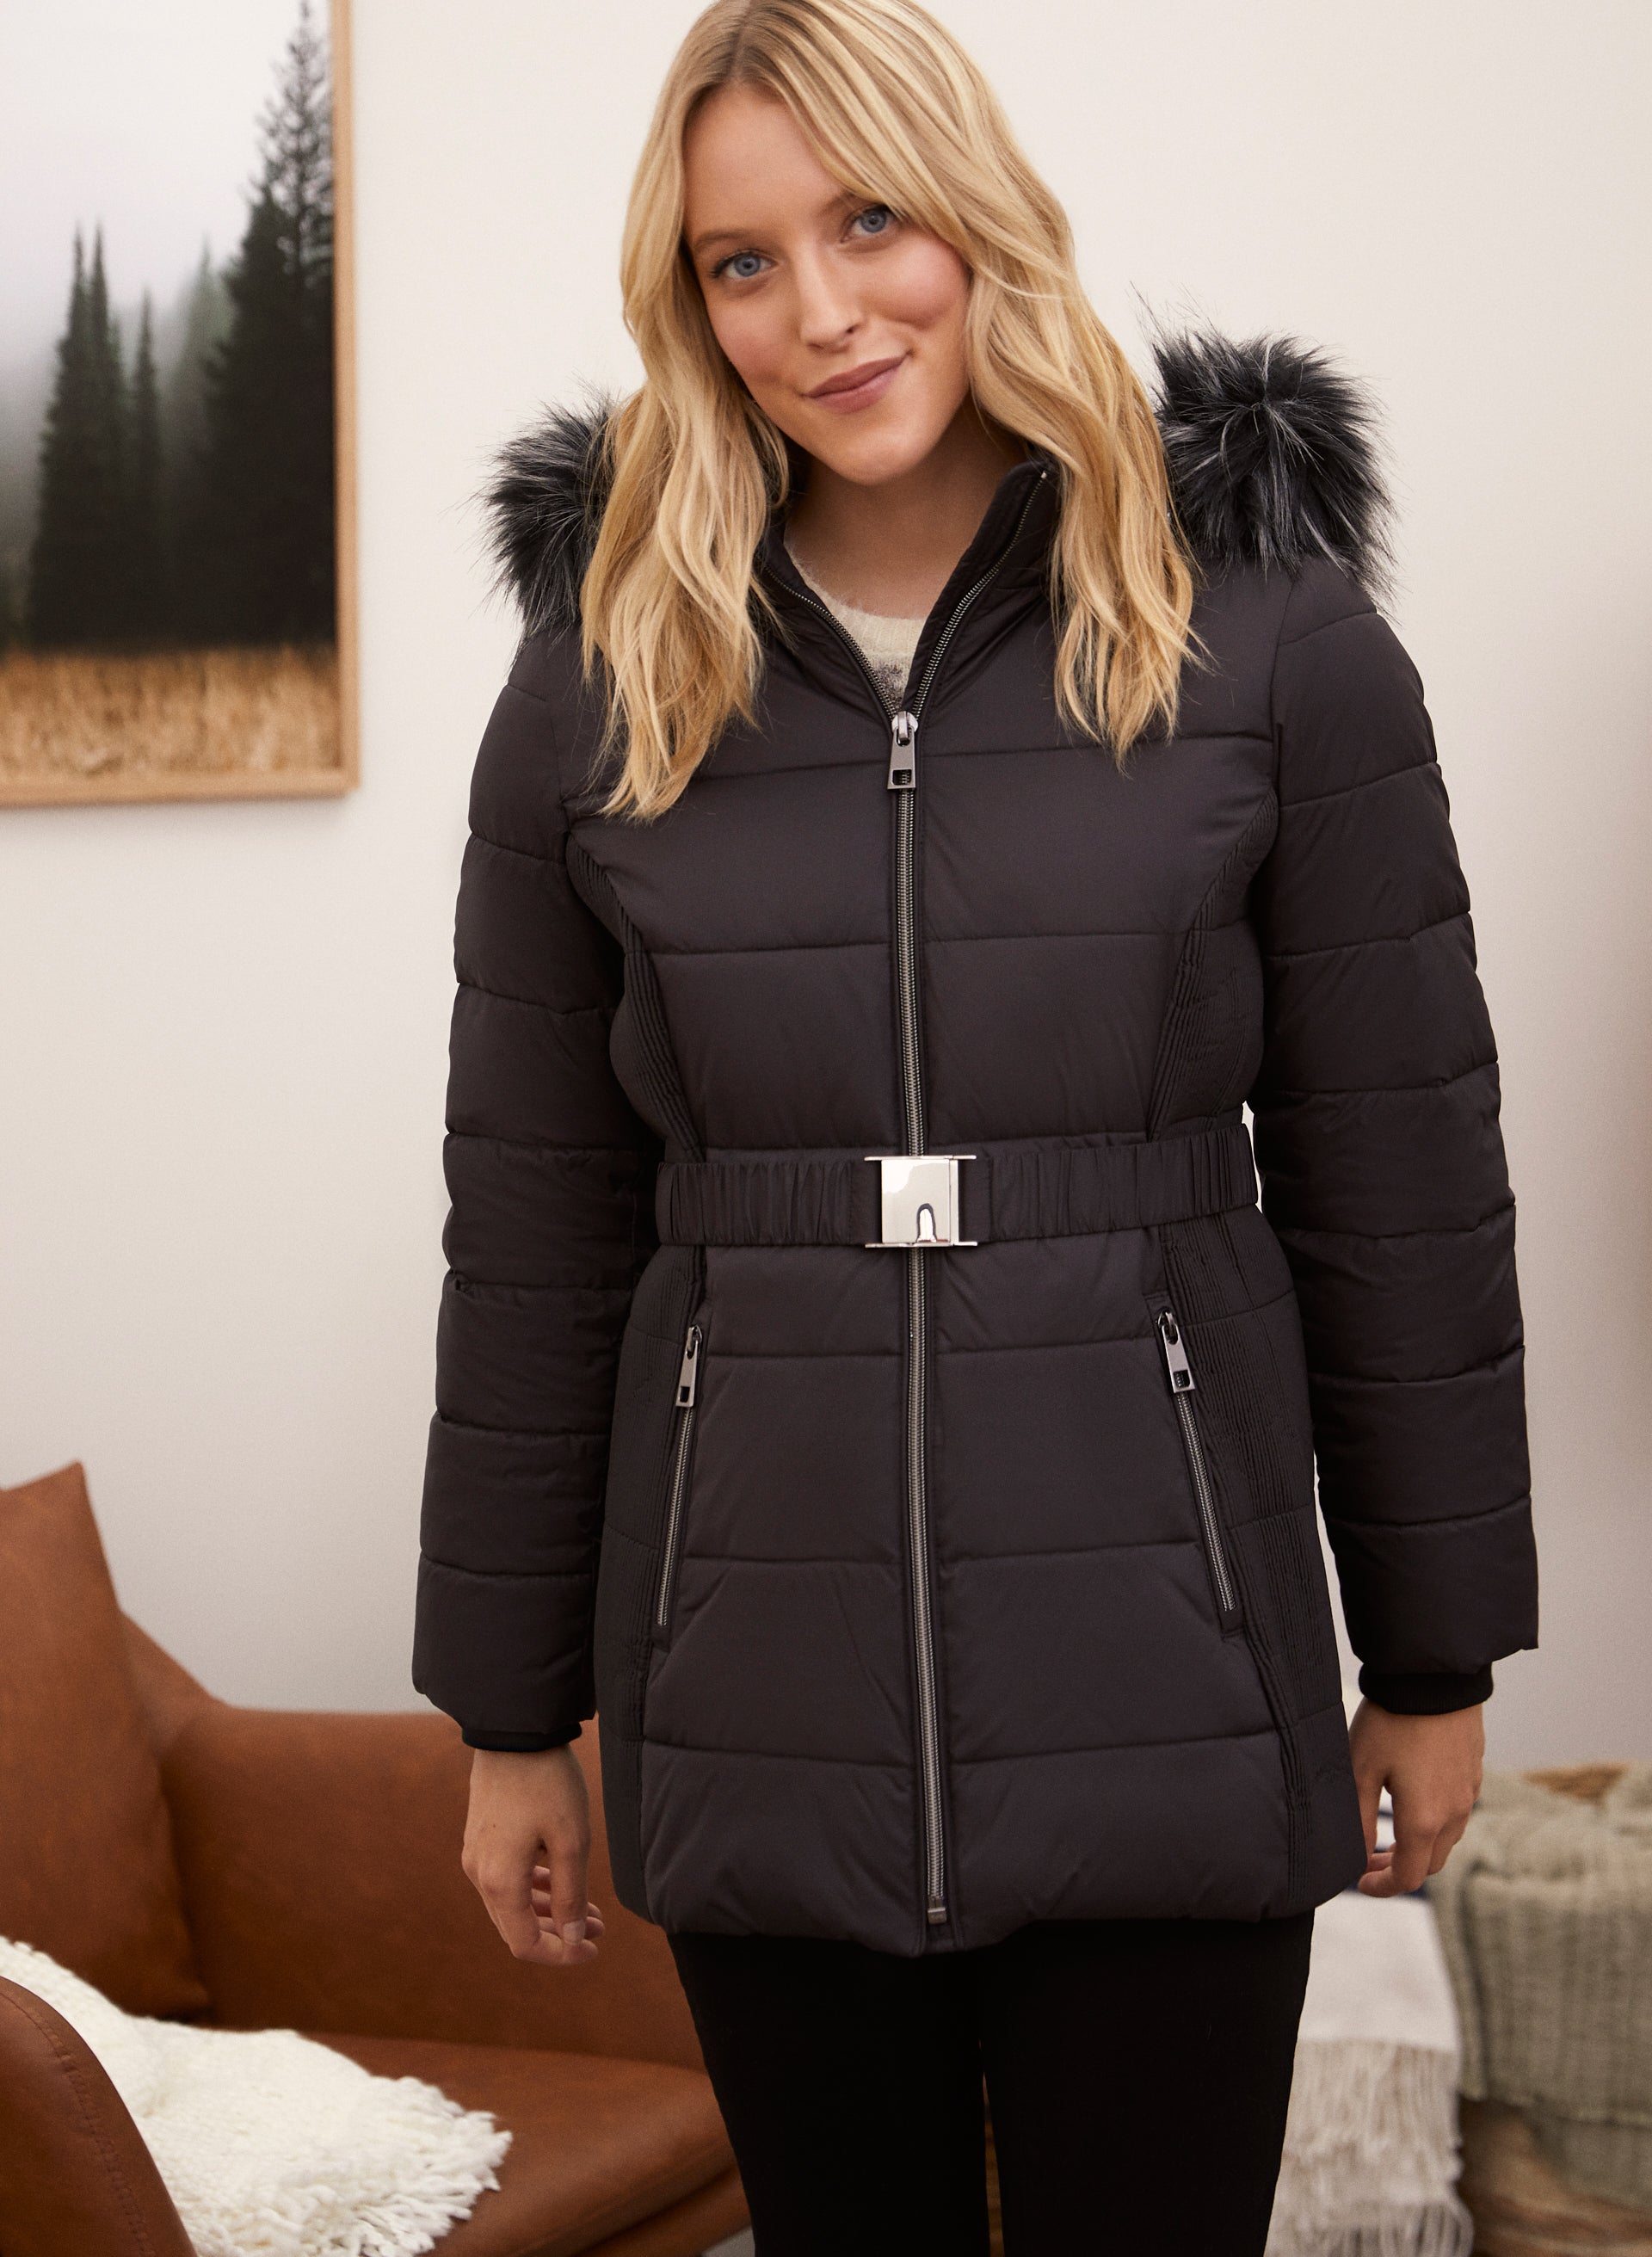 Laura Padded Short Coat in Recycled Polyester Black, Women's Coats